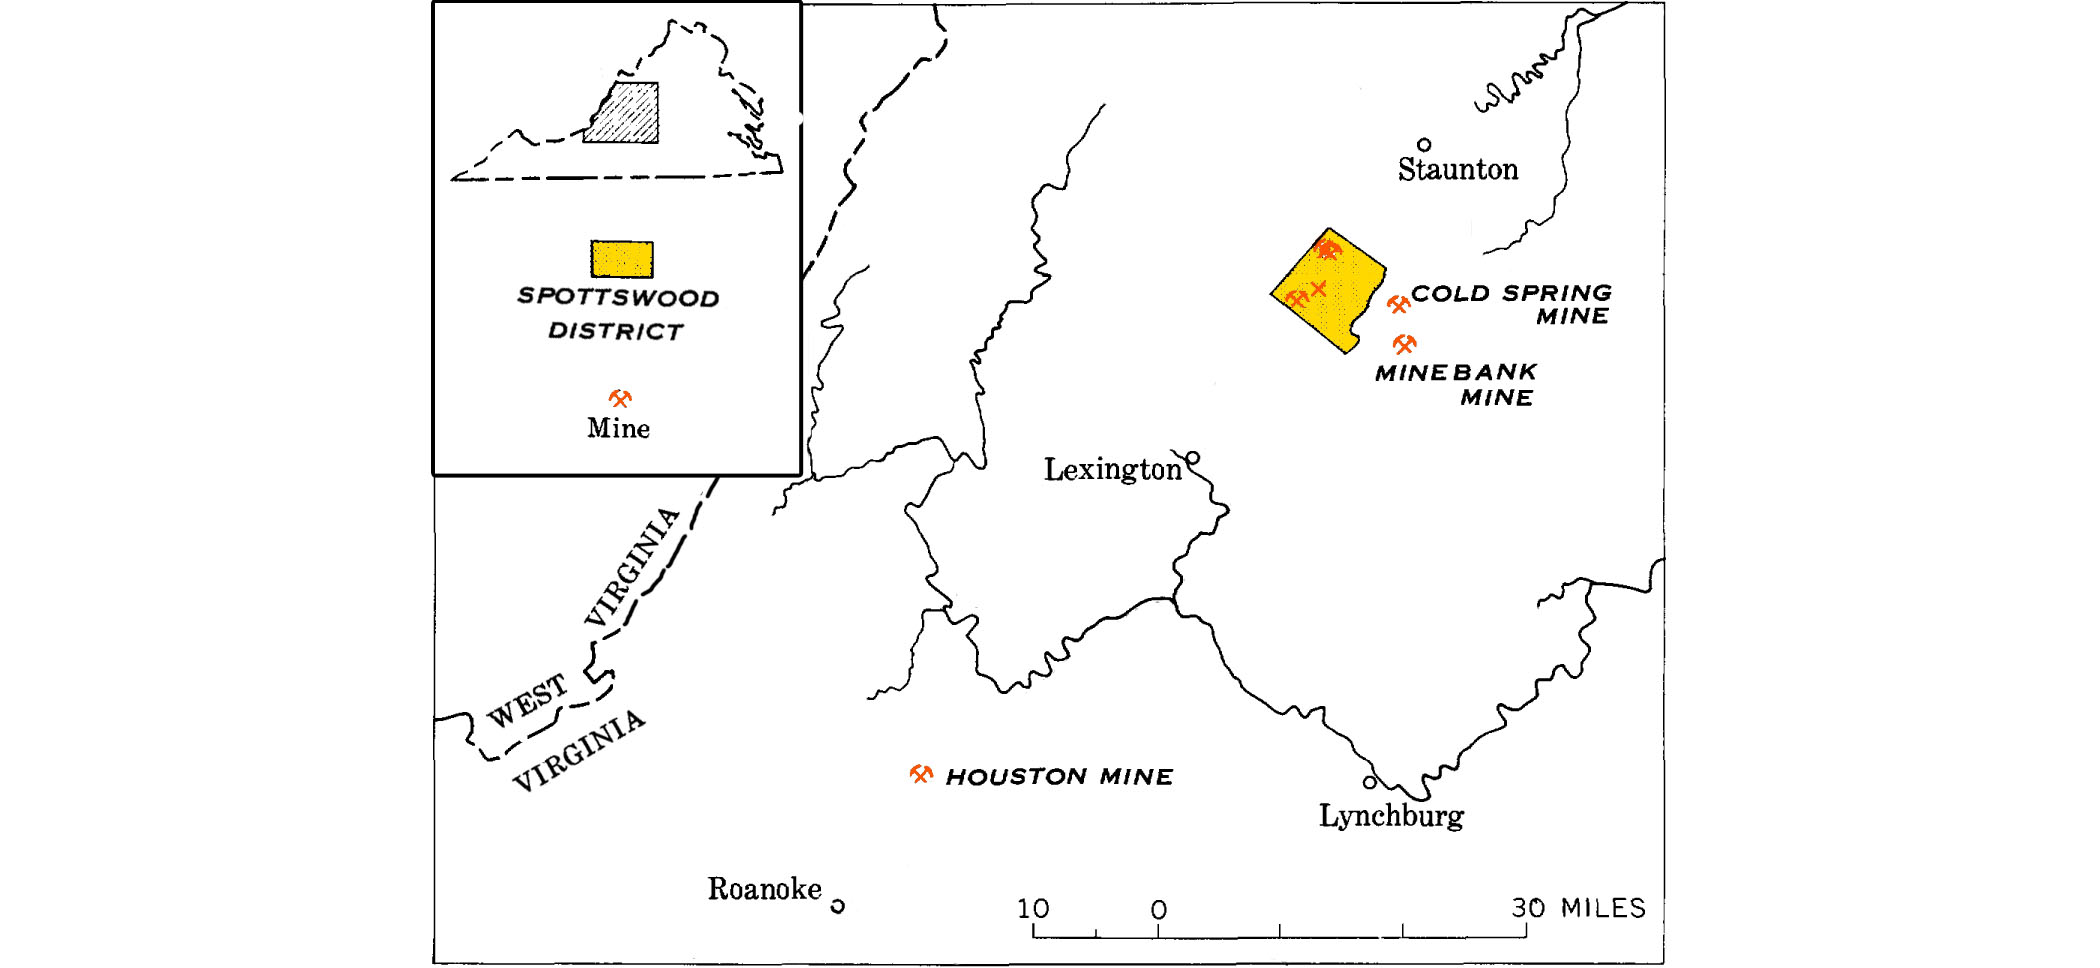 Detail map of aluminum mines and prospective deposits in Virginia